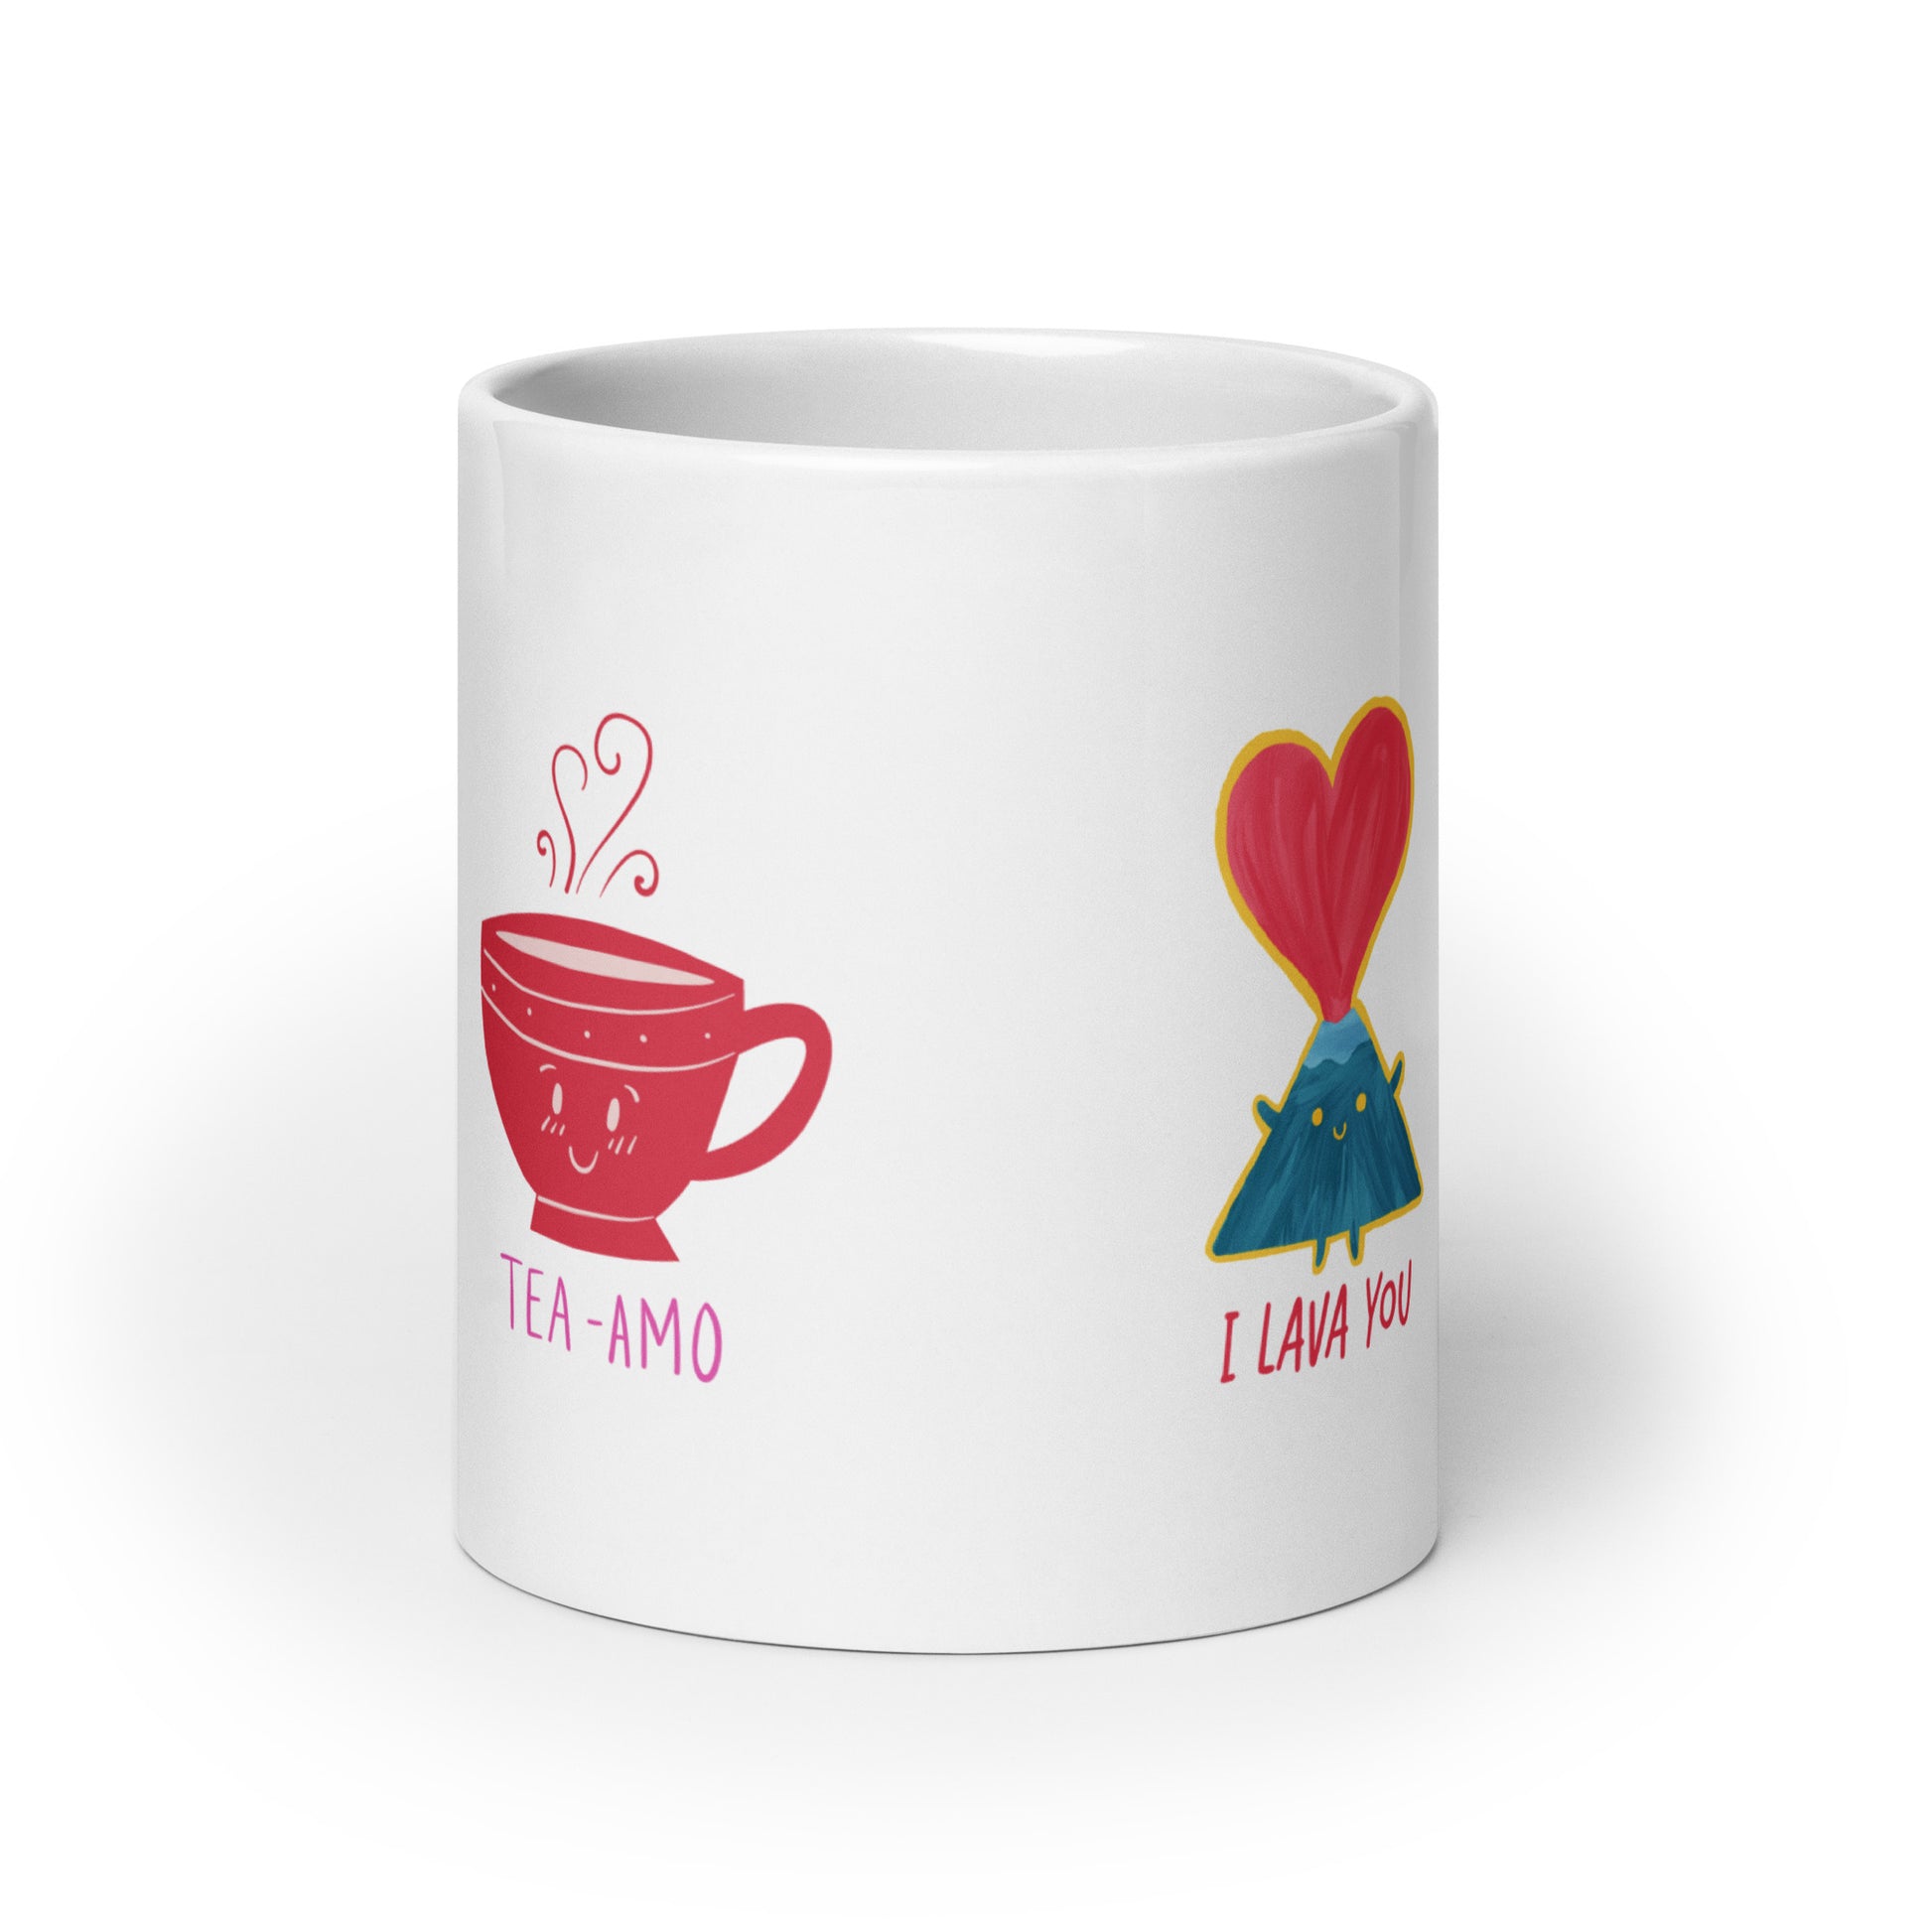 Cute Couple - White Glossy Mug Set for Adorable Moments | Perfect Gift for Partners